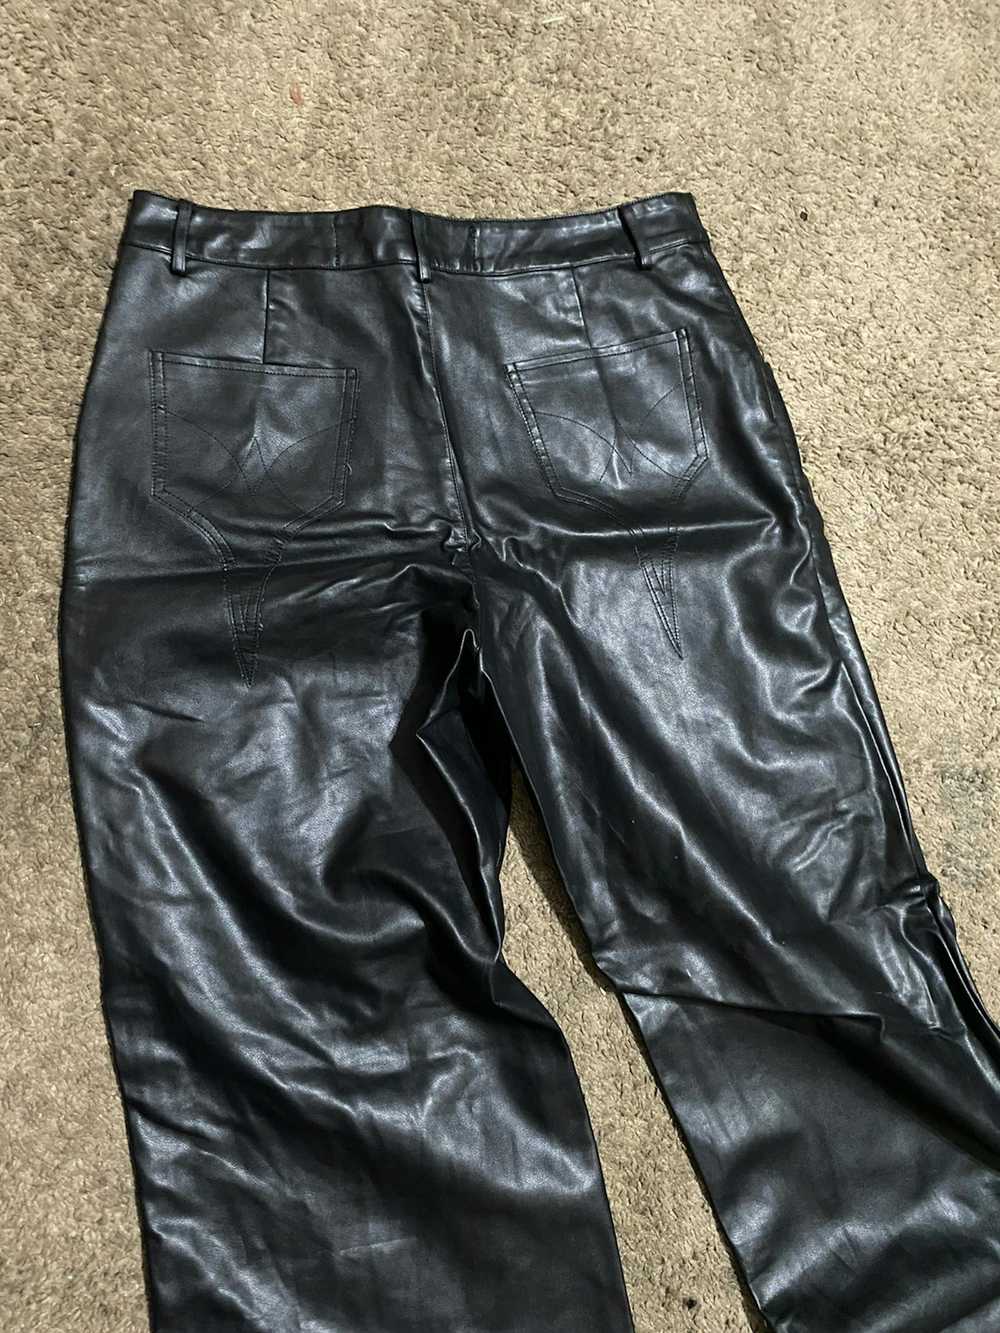 Other × Streetwear rustial leather pants - image 7